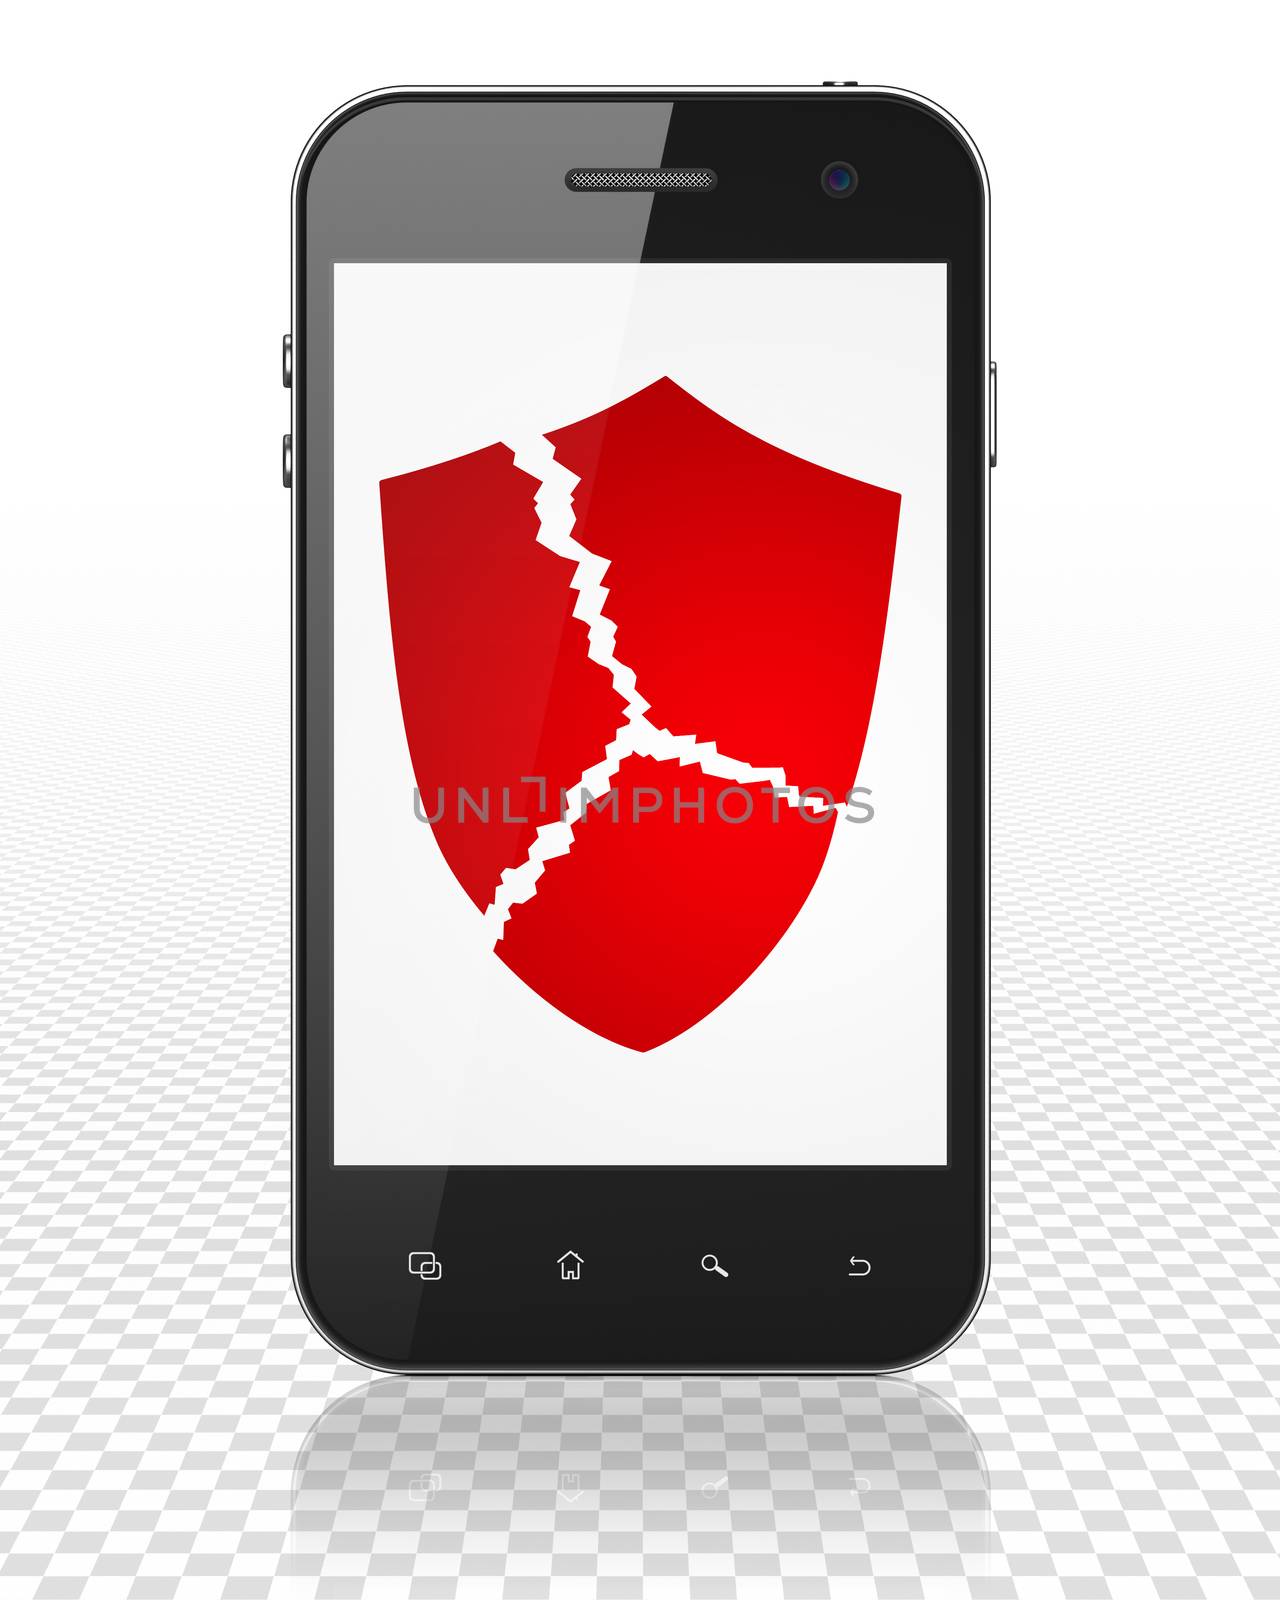 Protection concept: Smartphone with Broken Shield on display by maxkabakov